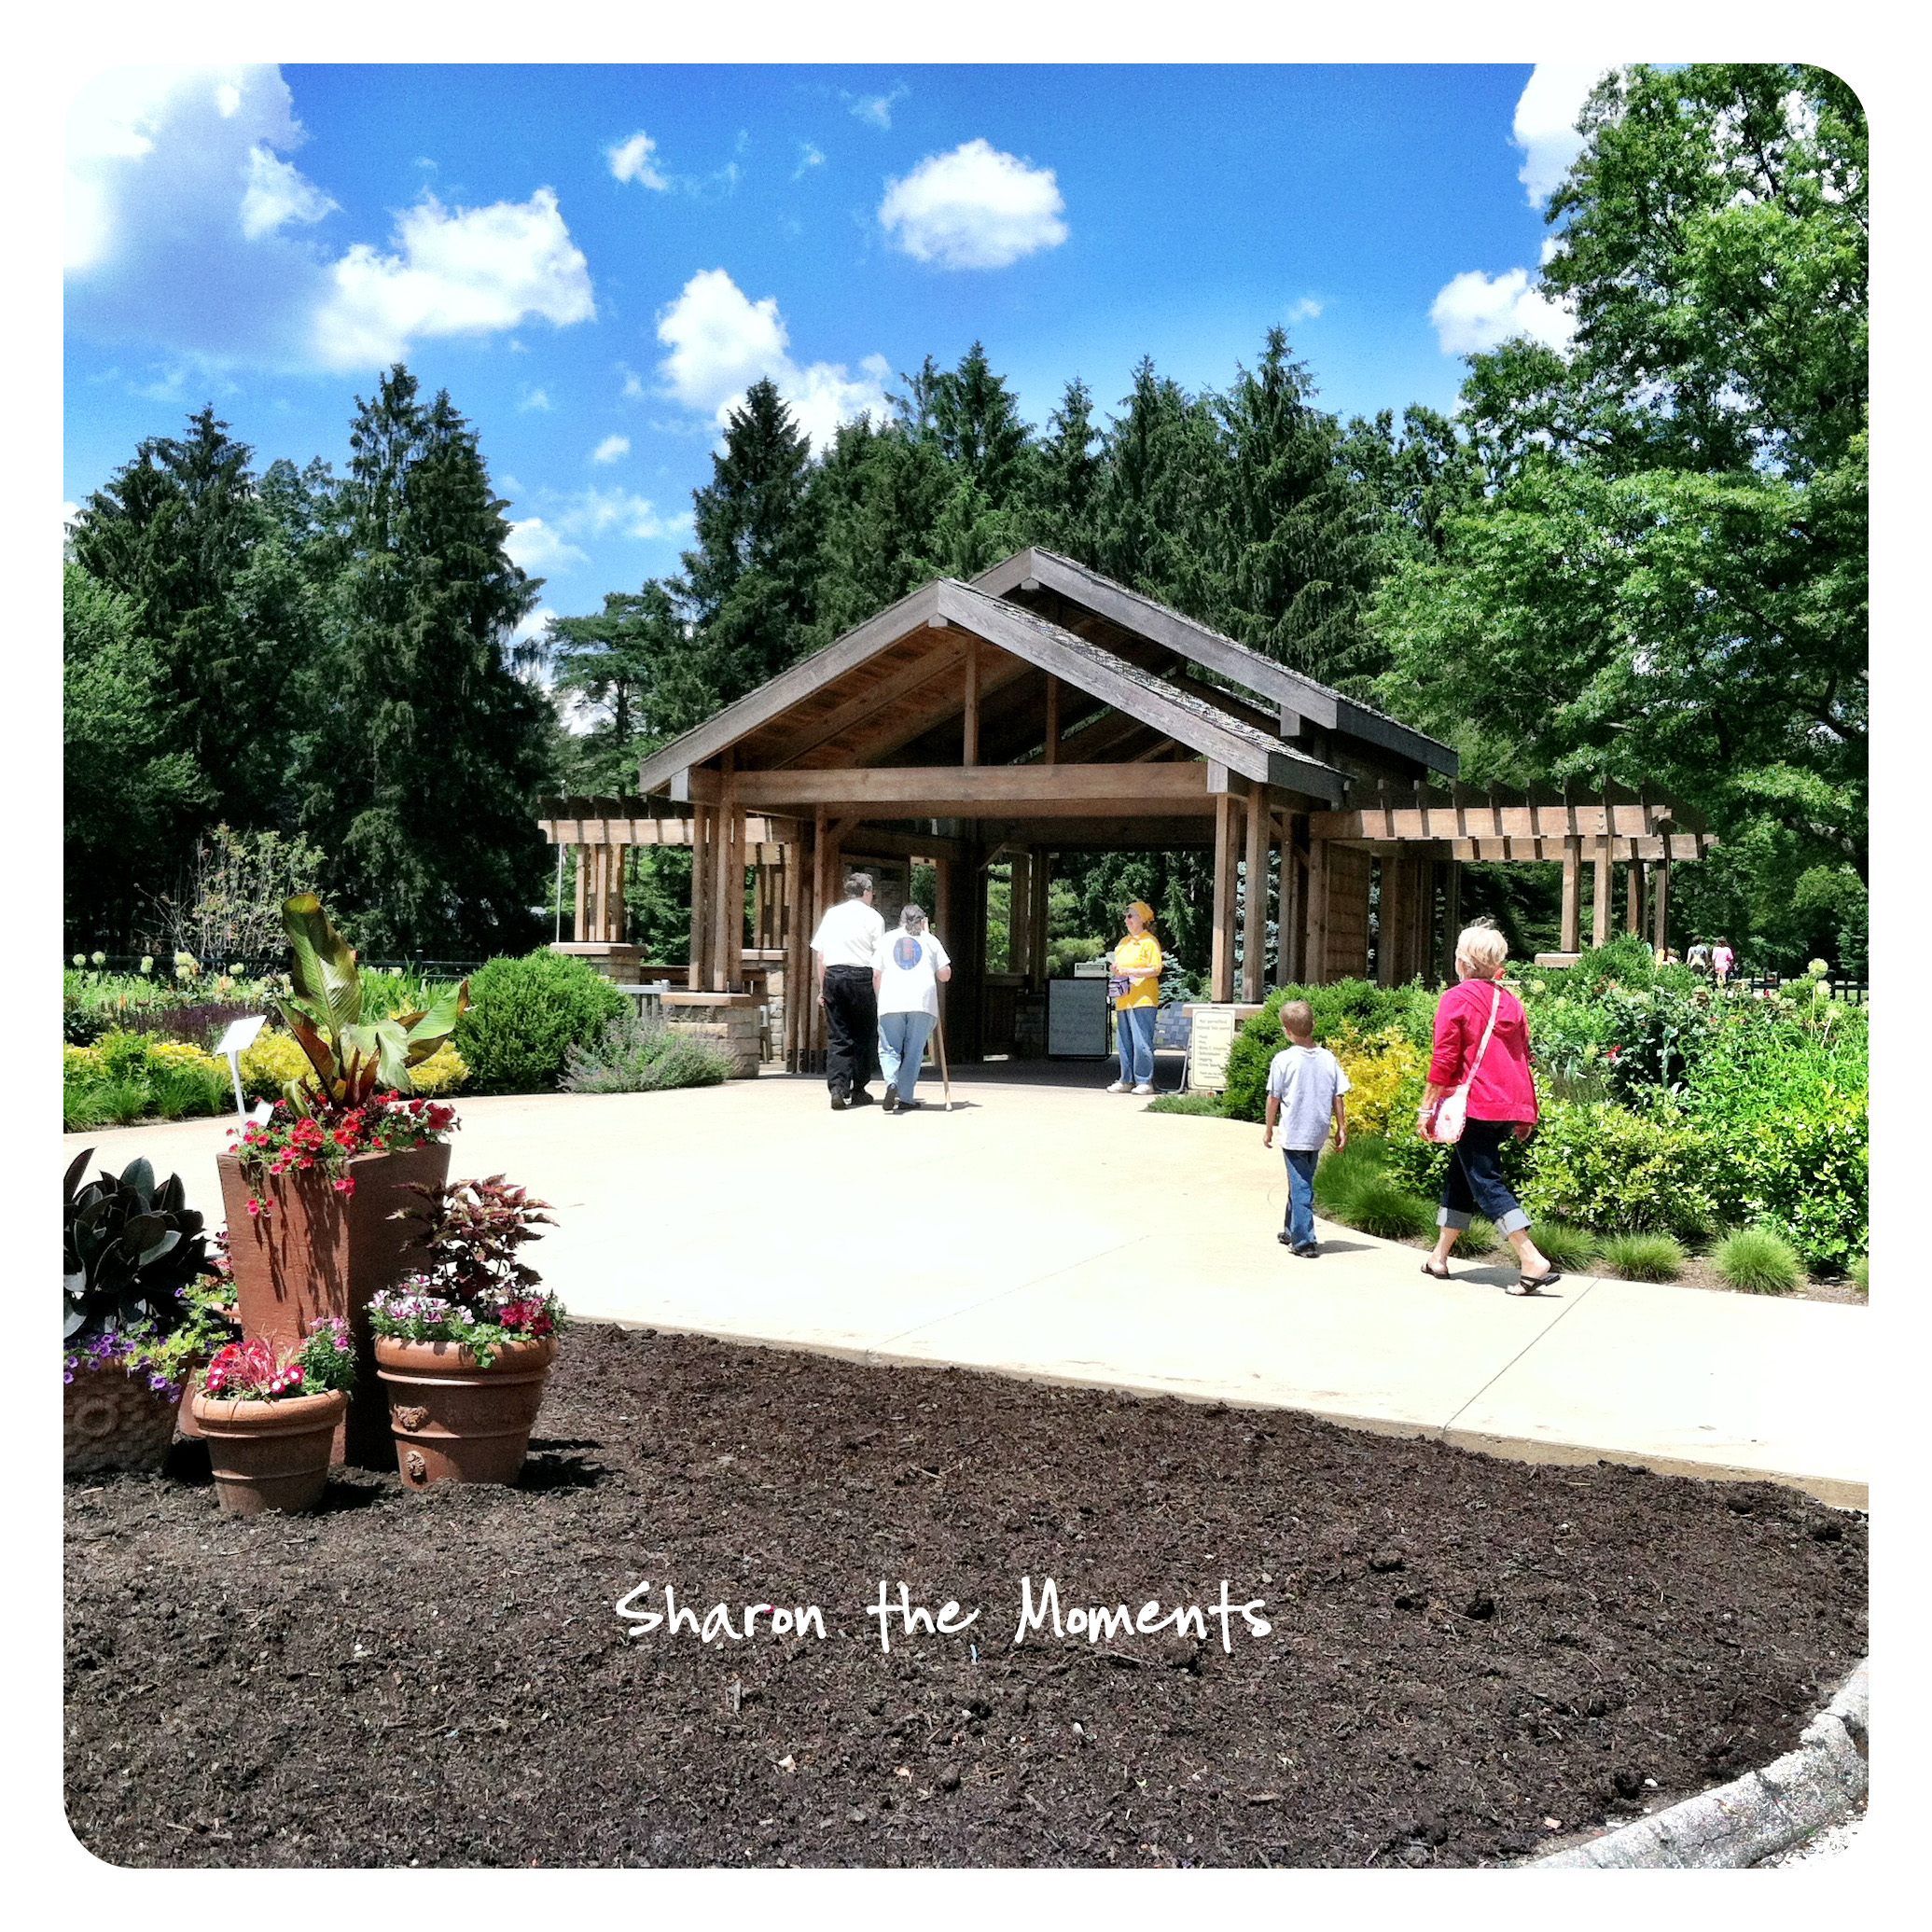 iPhoneography for Relaxing Sunday Mornings Inniswood Metro Park|Sharon the Moments blog